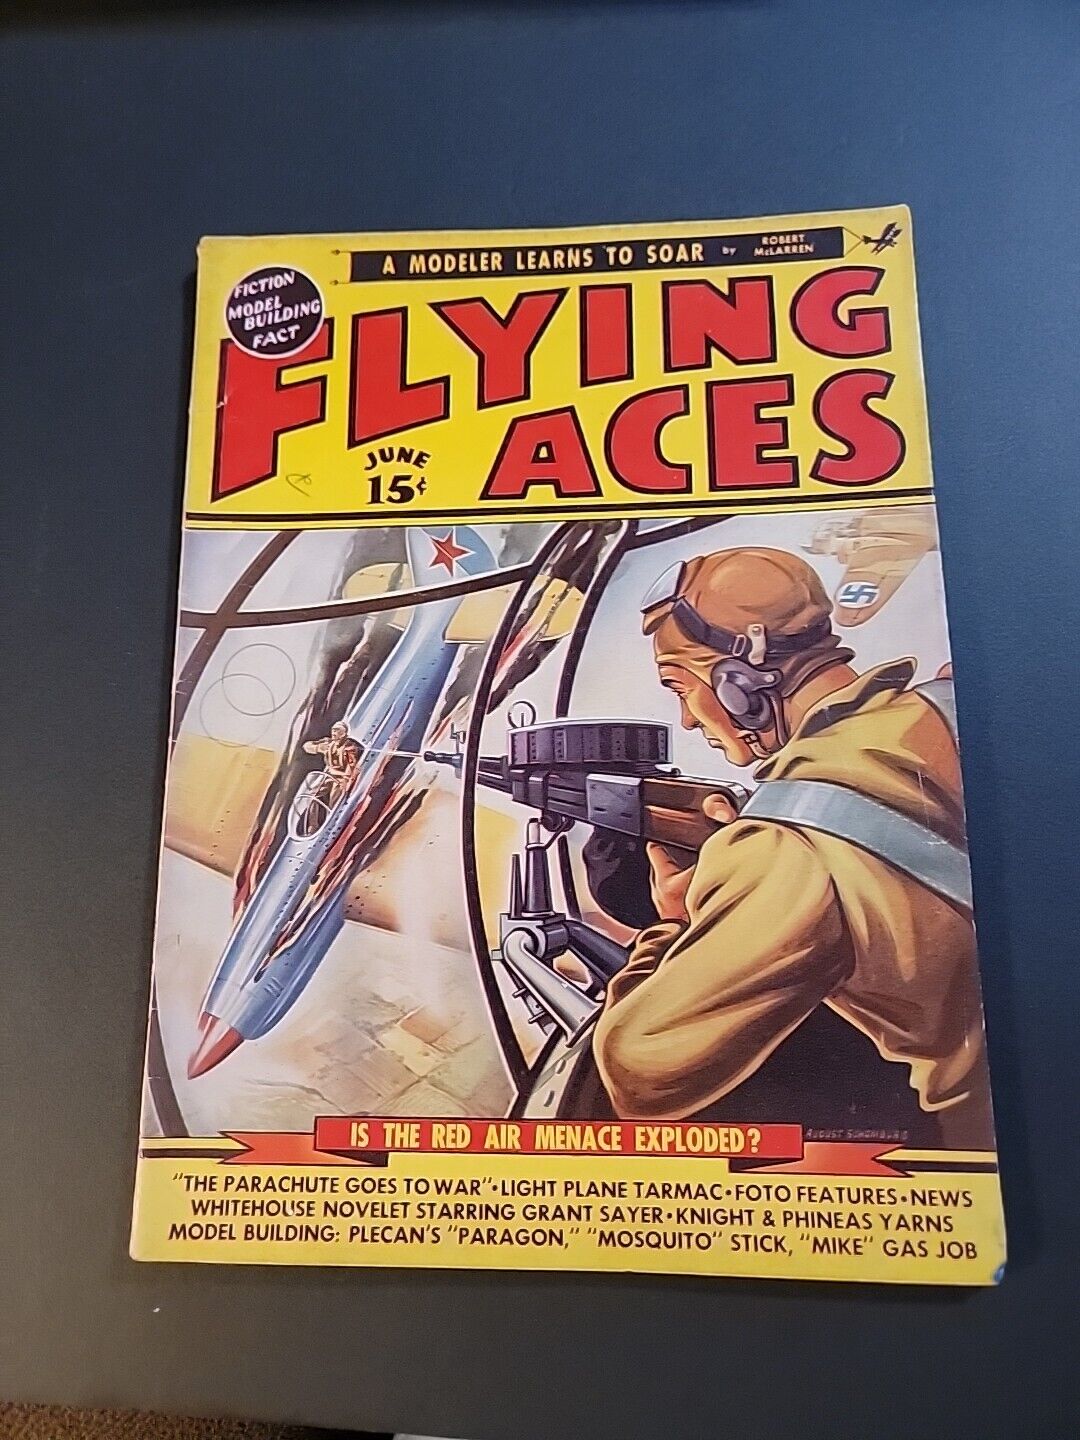 WW2✈️ 1940 JUNE FLYING ACES MAGAZINE ILLUSTRATED FRONT COVER